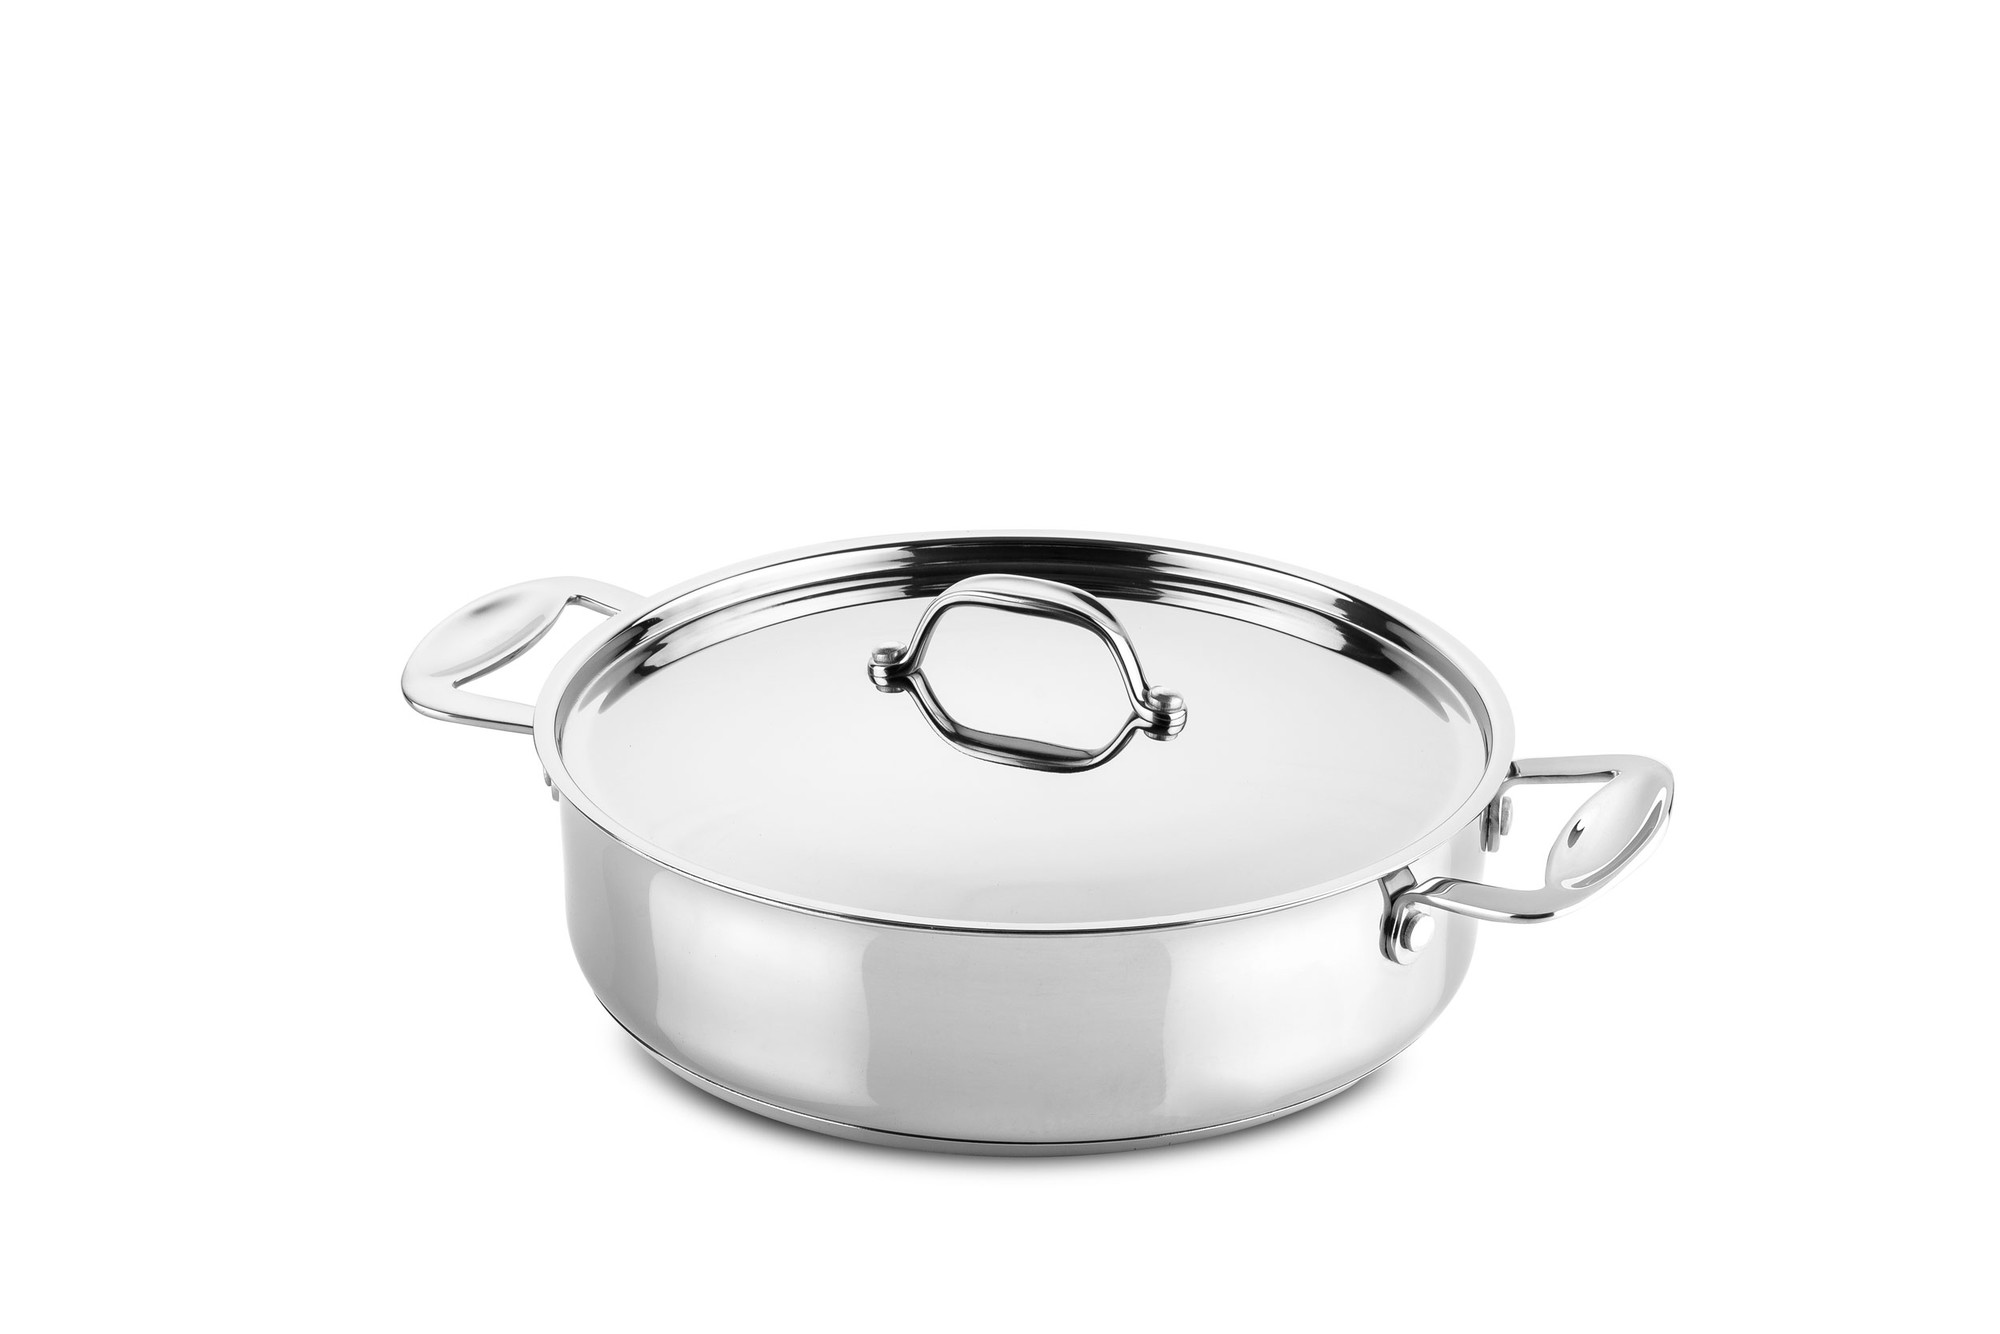 Frying pan 2 handles 26 cm Glamour Stone Stainless Steel